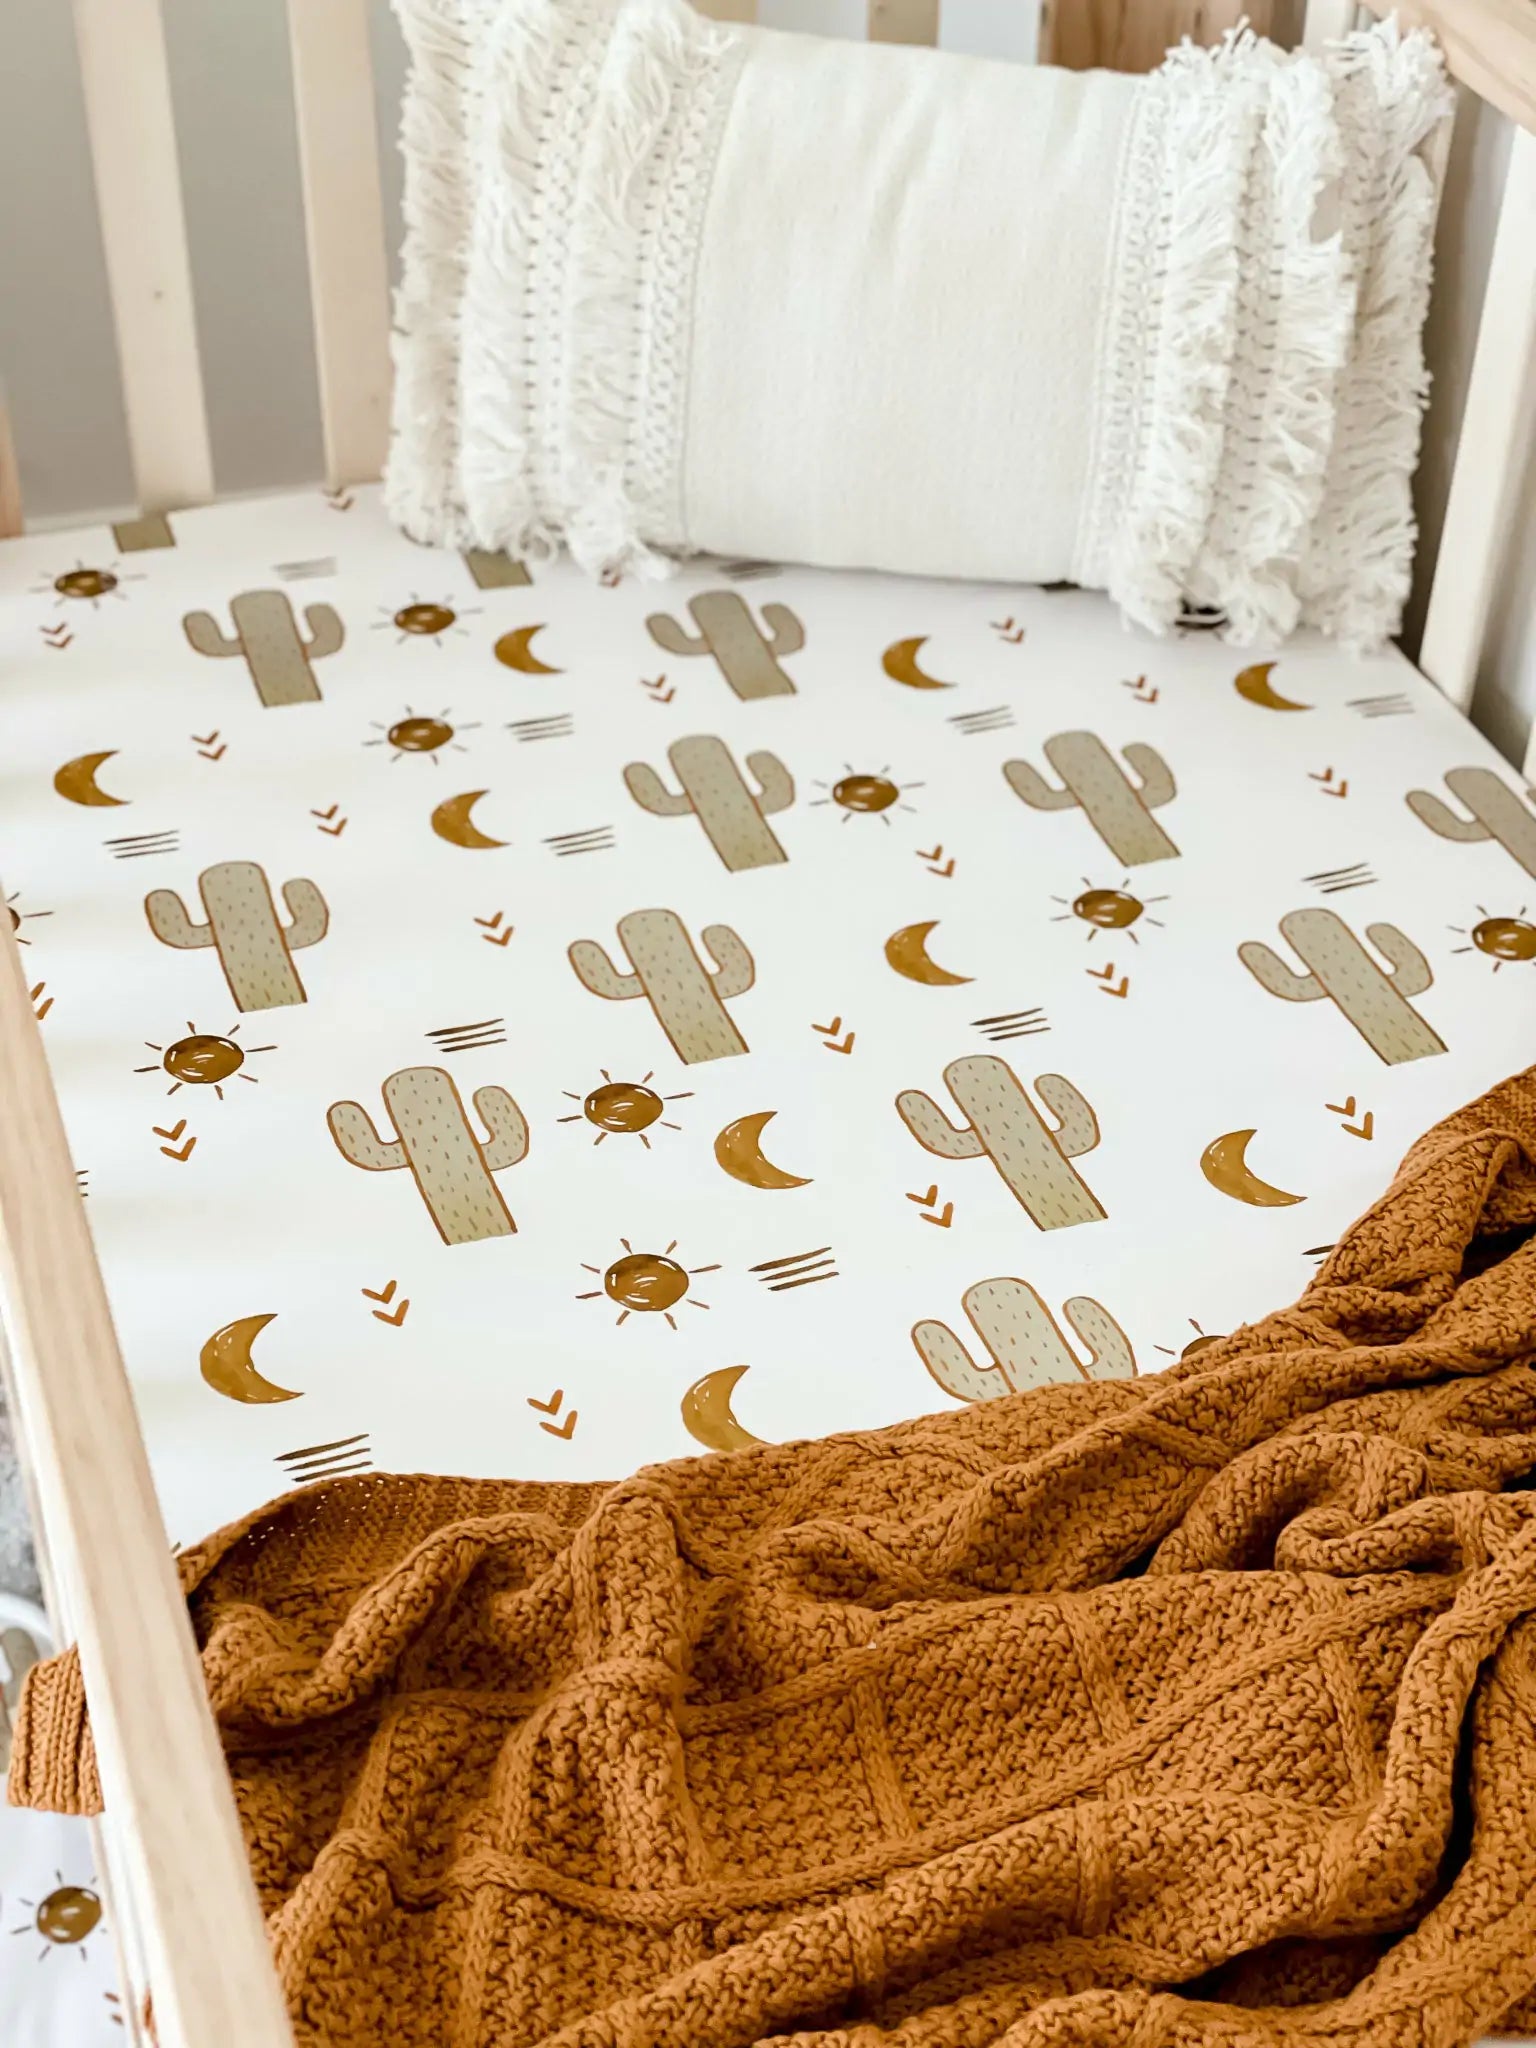 These cotton sheets are made to fit cot sizes of 140 x 70 , est. in Australia in 2013.